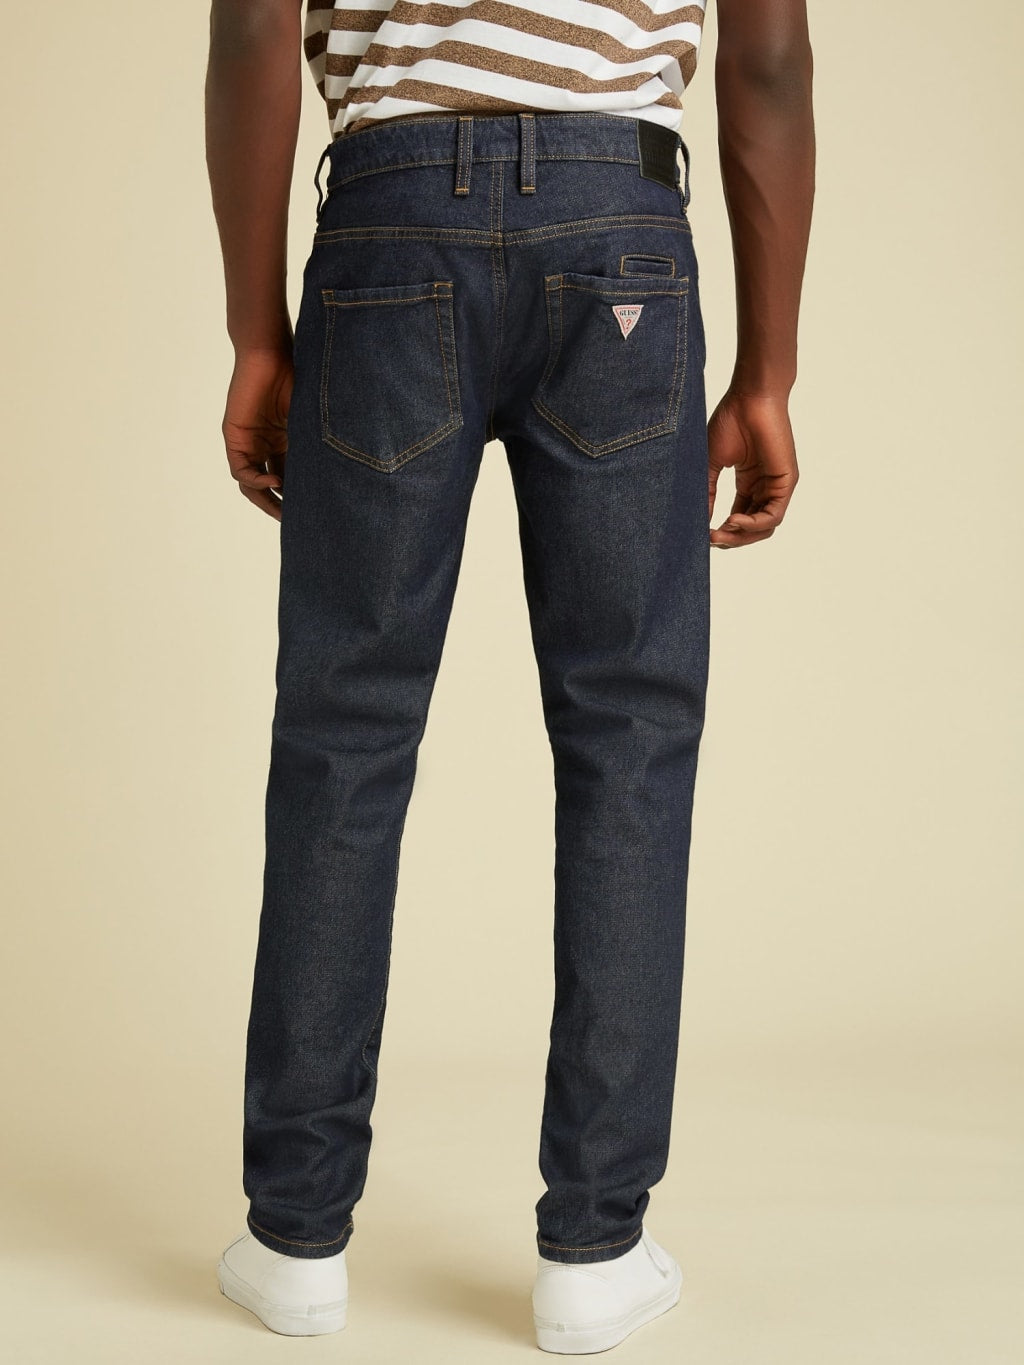 GUESS Originals Slim Straight Jeans - Guess